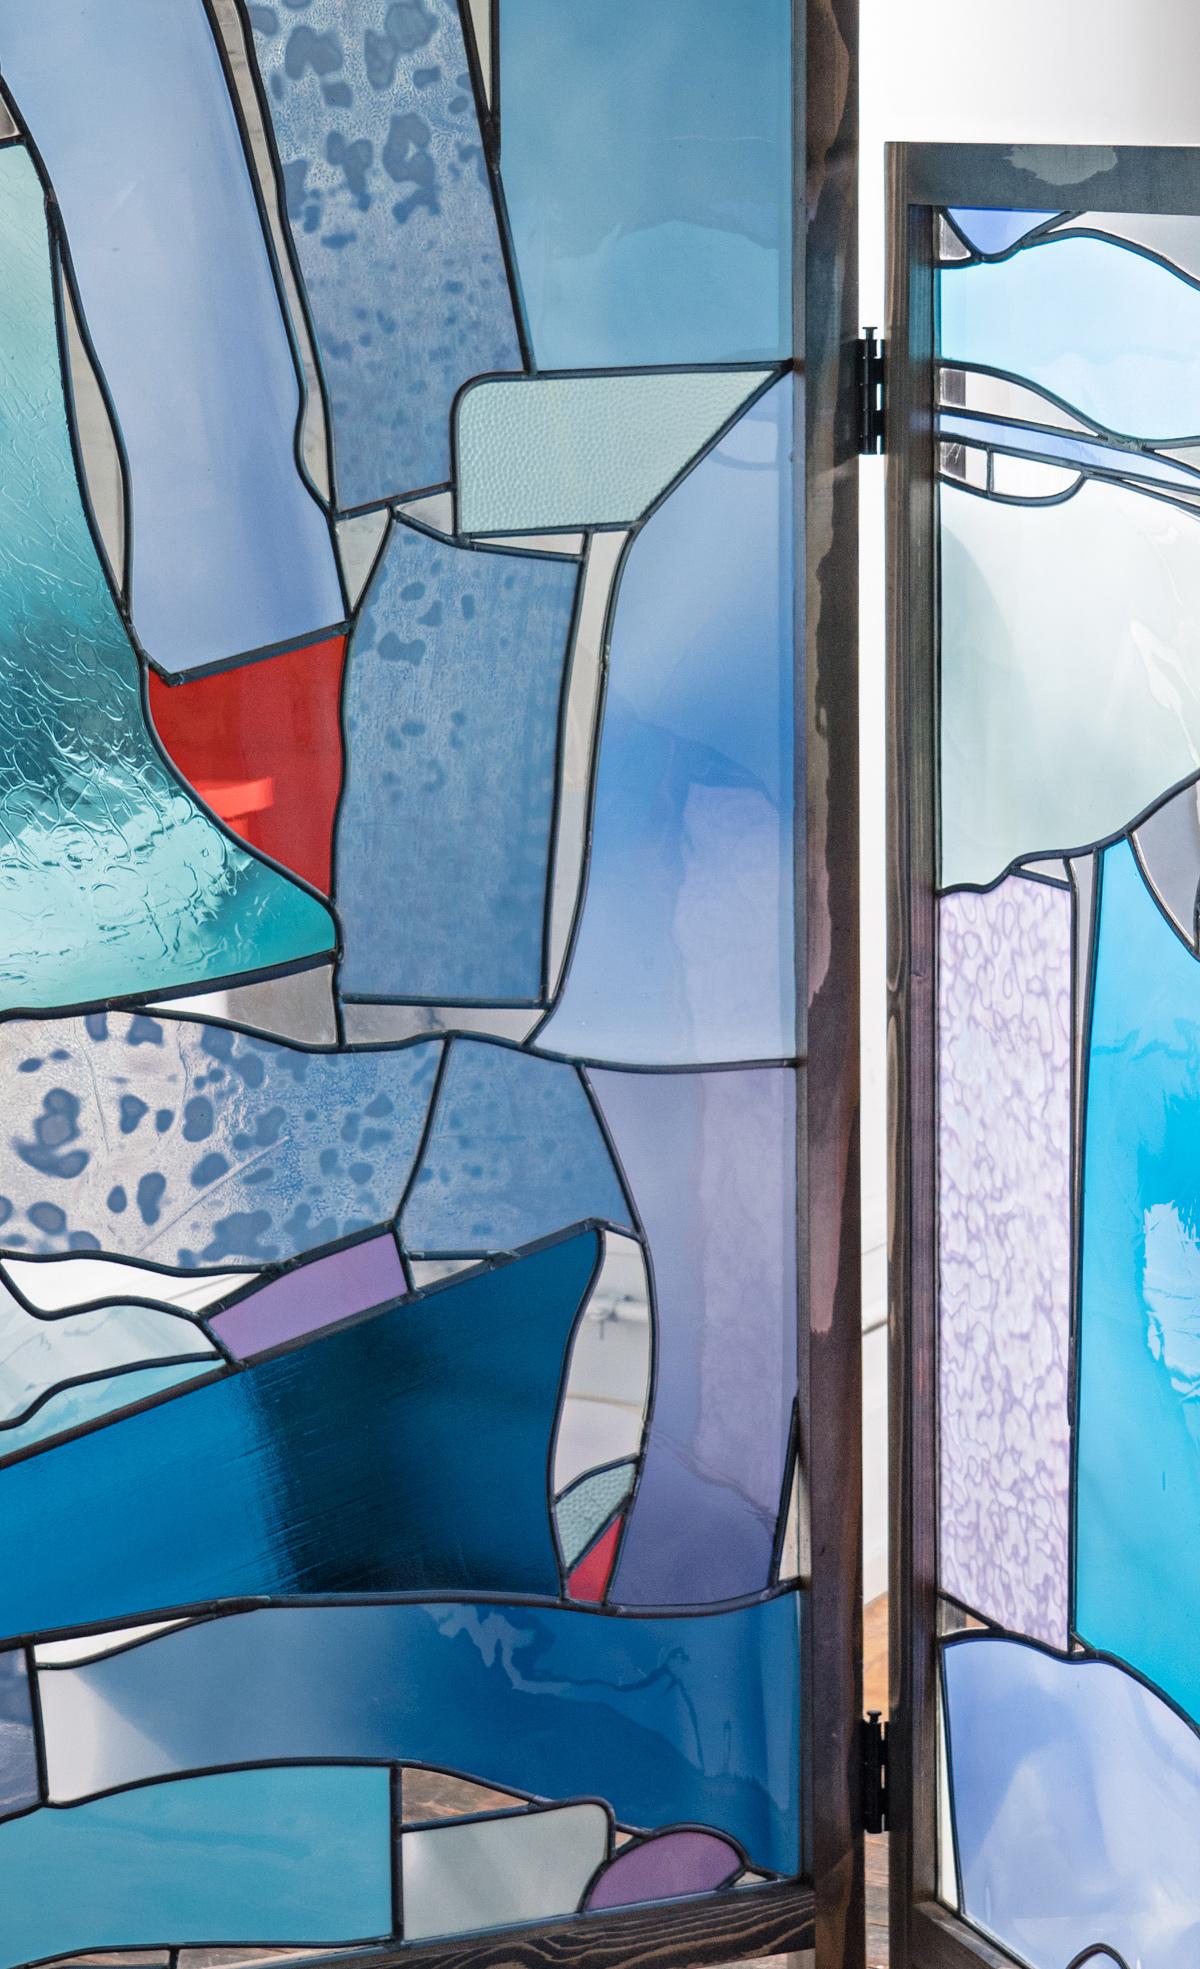 Known for his formal explorations of color, light, and abstraction in leaded glass, Weiss winds a lively color palette and joyful juxtapositions of forms into his work. His unique use of negative space and clear glass invites architectural and